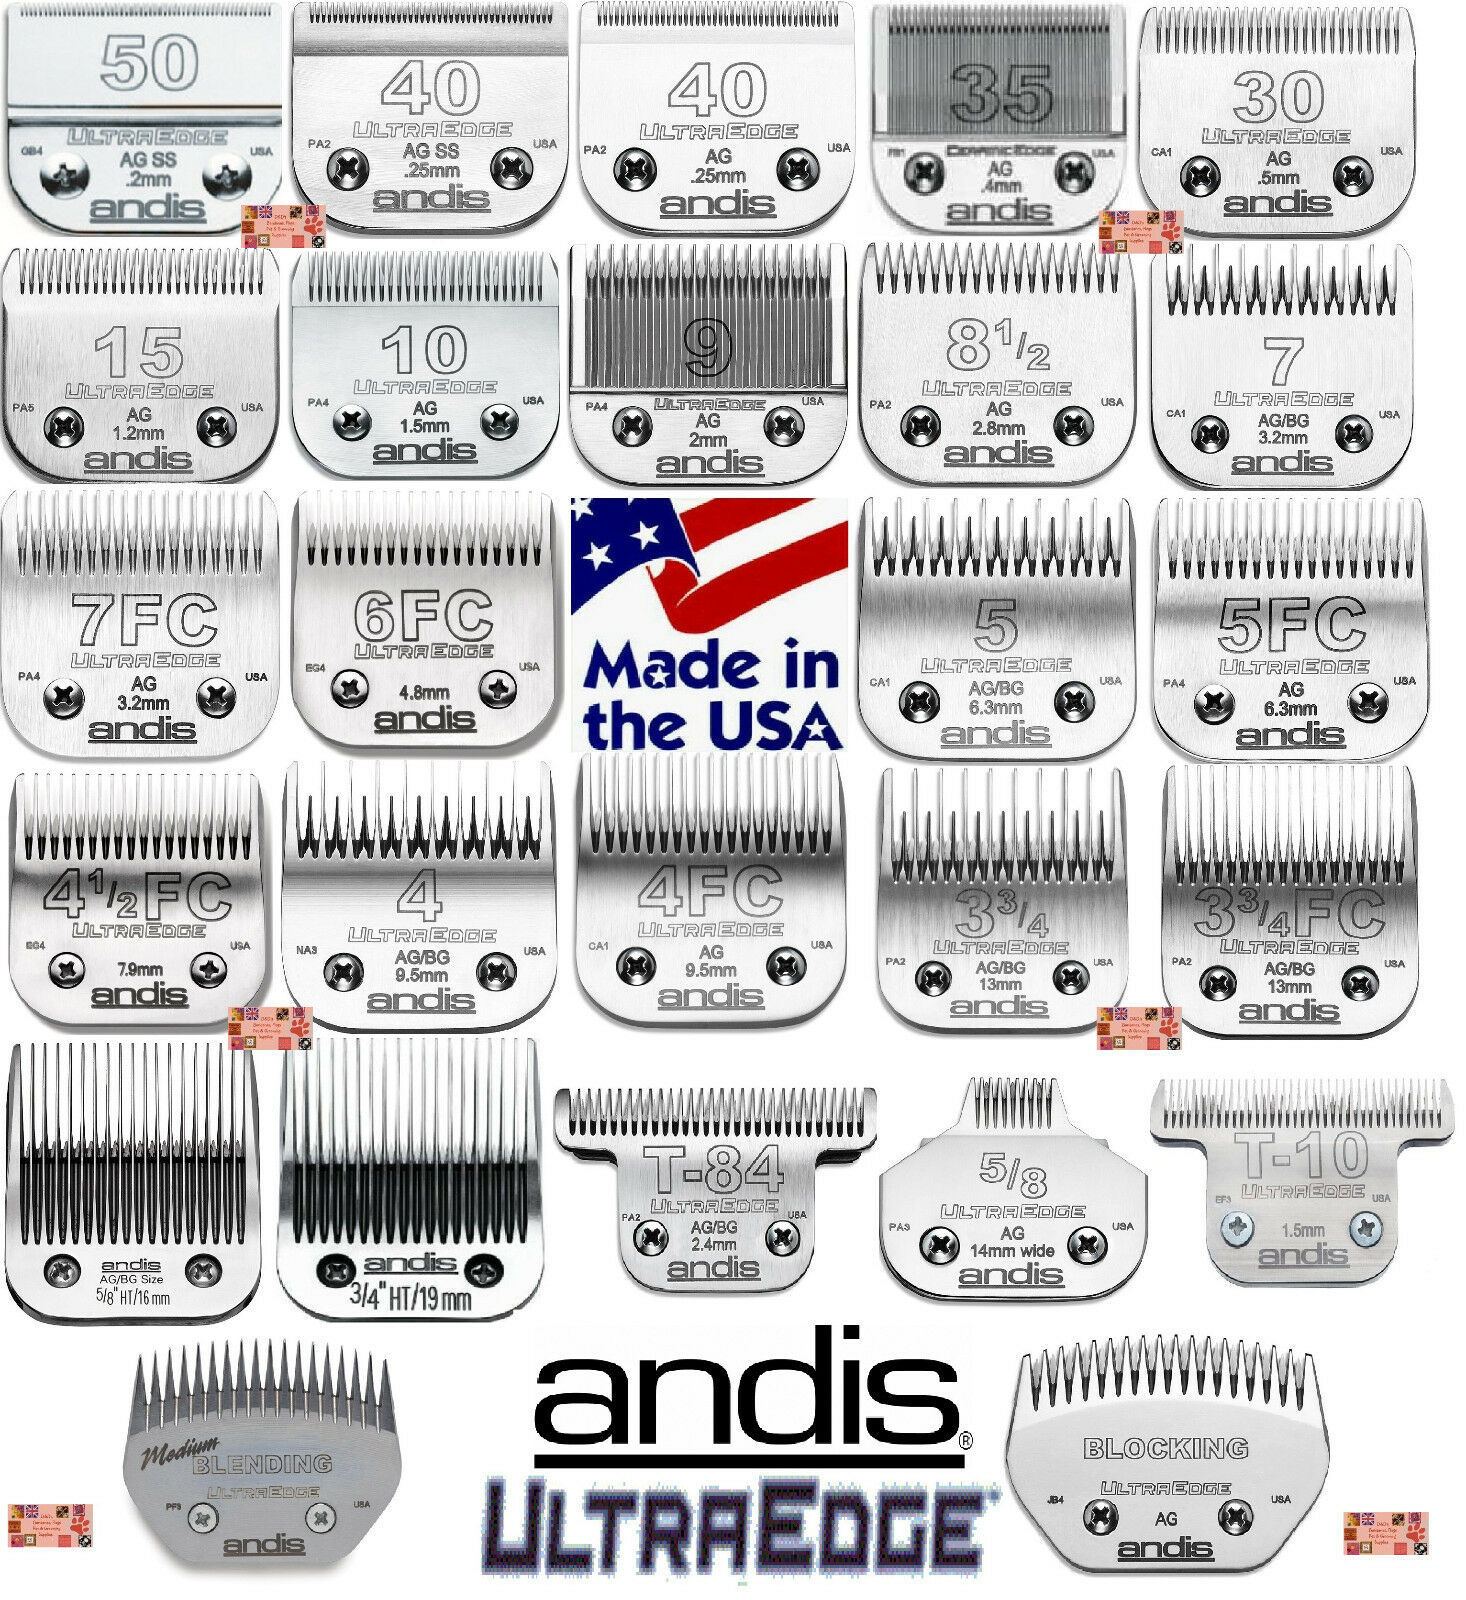 ANDIS UltraEdge Steel Blades*Fit AG BG,Oster A5 A6,Wahl KM Clippers Pet Grooming